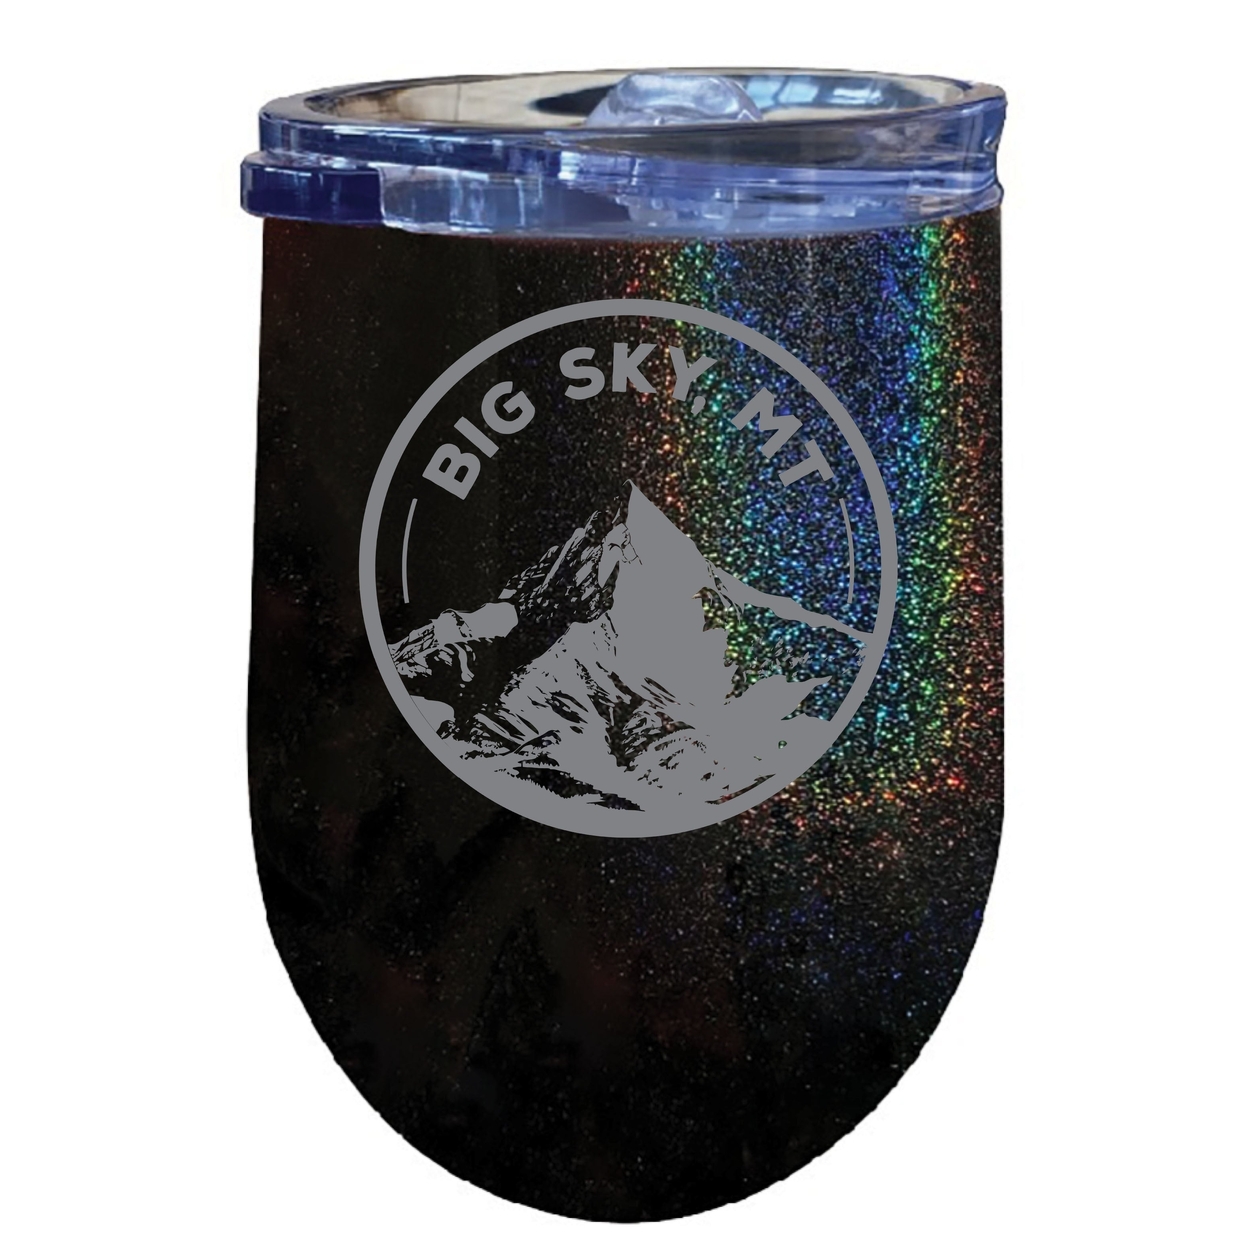 Big Sky Montana Souvenir 12 Oz Engraved Insulated Wine Stainless Steel Tumbler - Rainbow Glitter Gray,,4-Pack